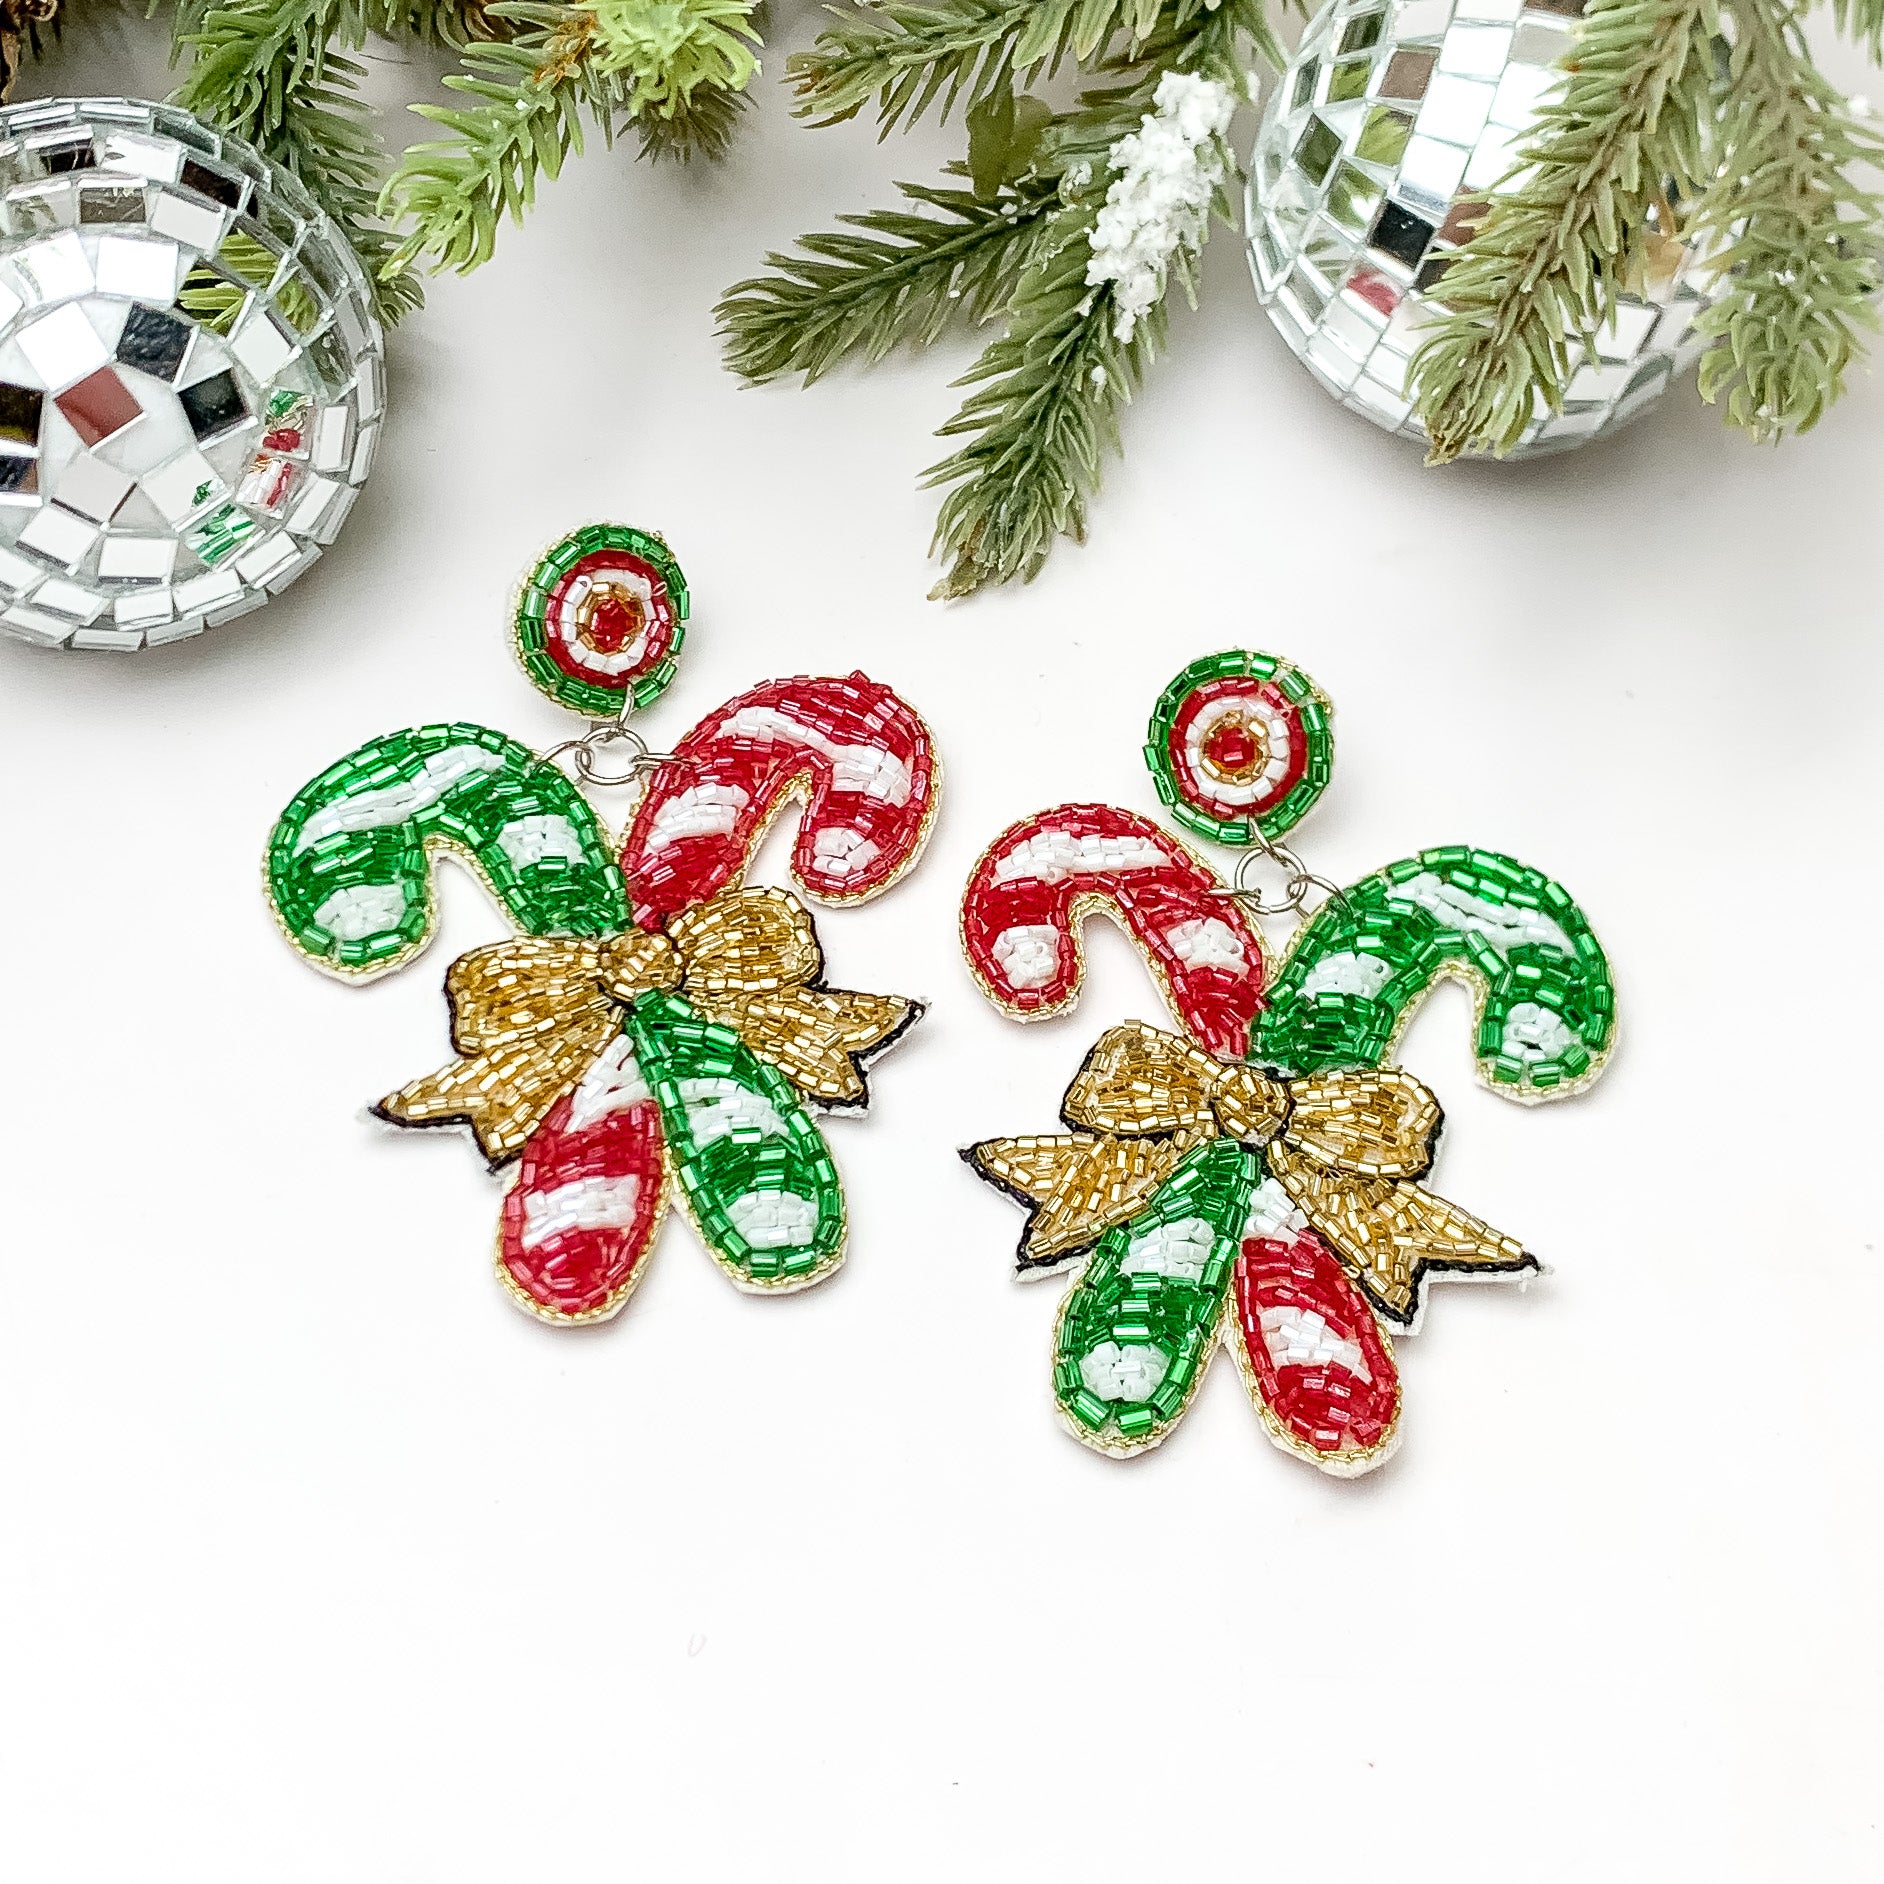 Beaded Candy Canes Earrings with Gold Tone Bow in Red and Green - Giddy Up Glamour Boutique